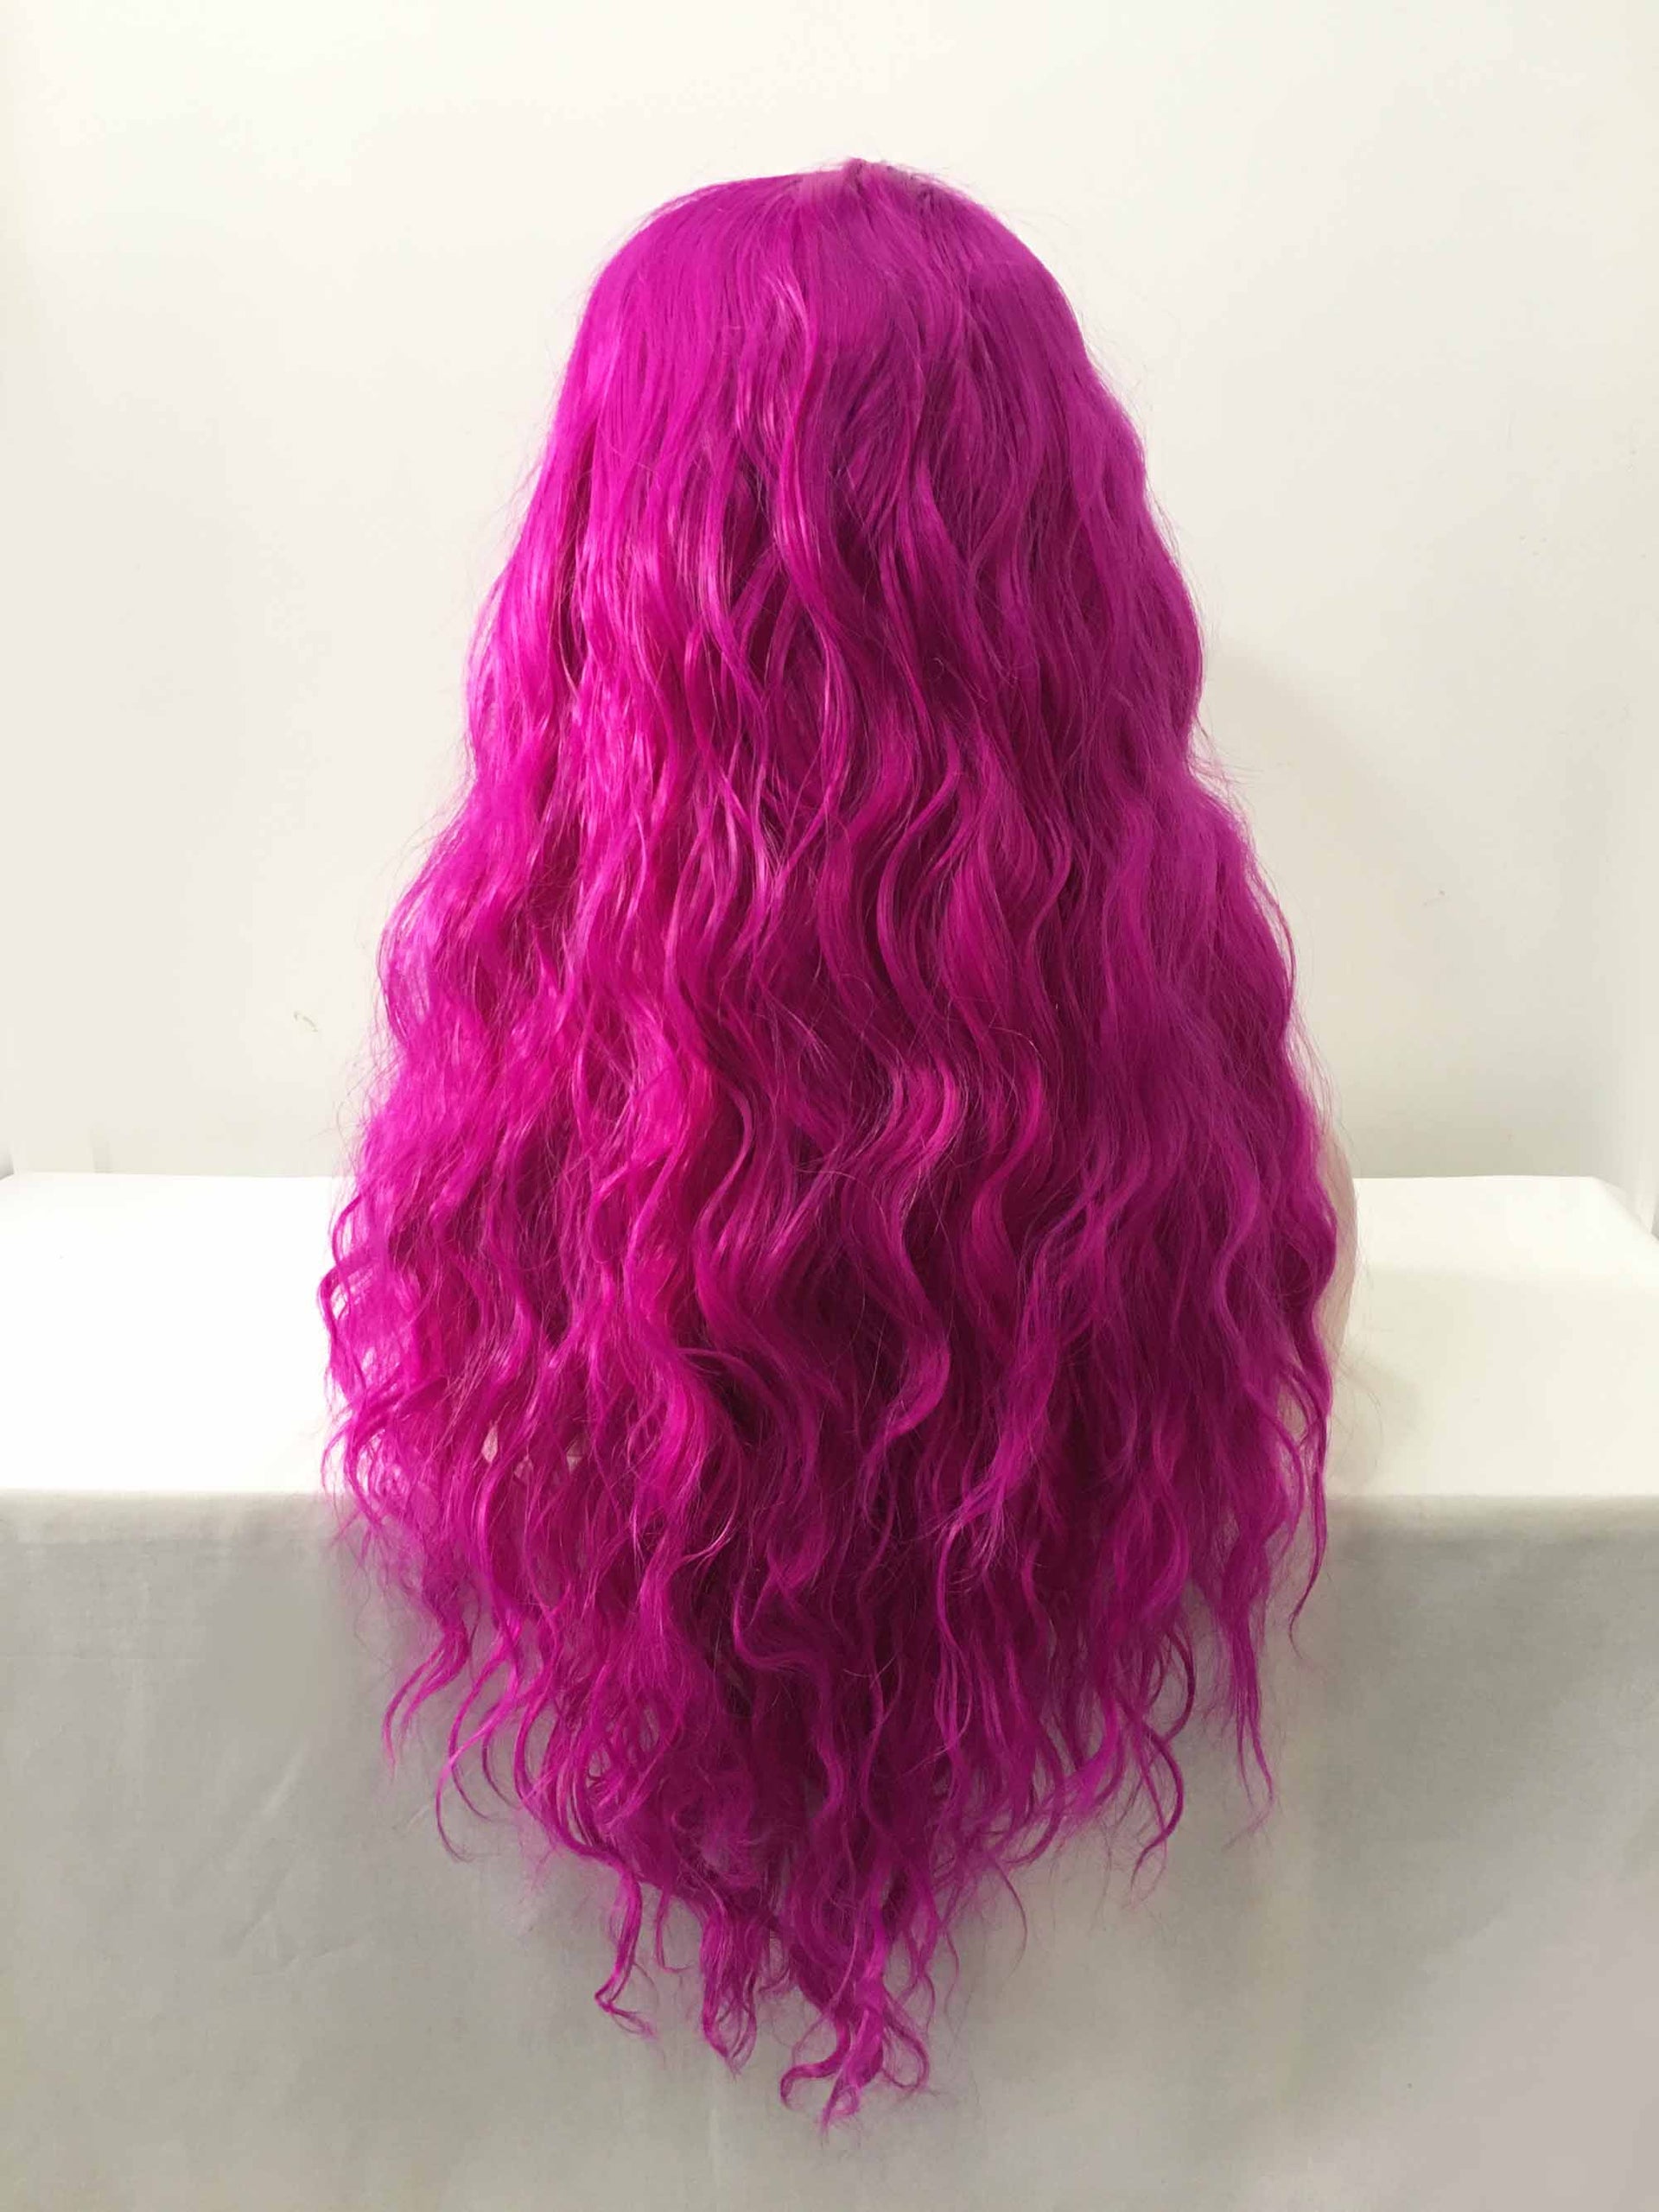 nevermindyrhead Women Lace Front Purple Red Middle Part Long Curly Wavy Thick Hair Wig